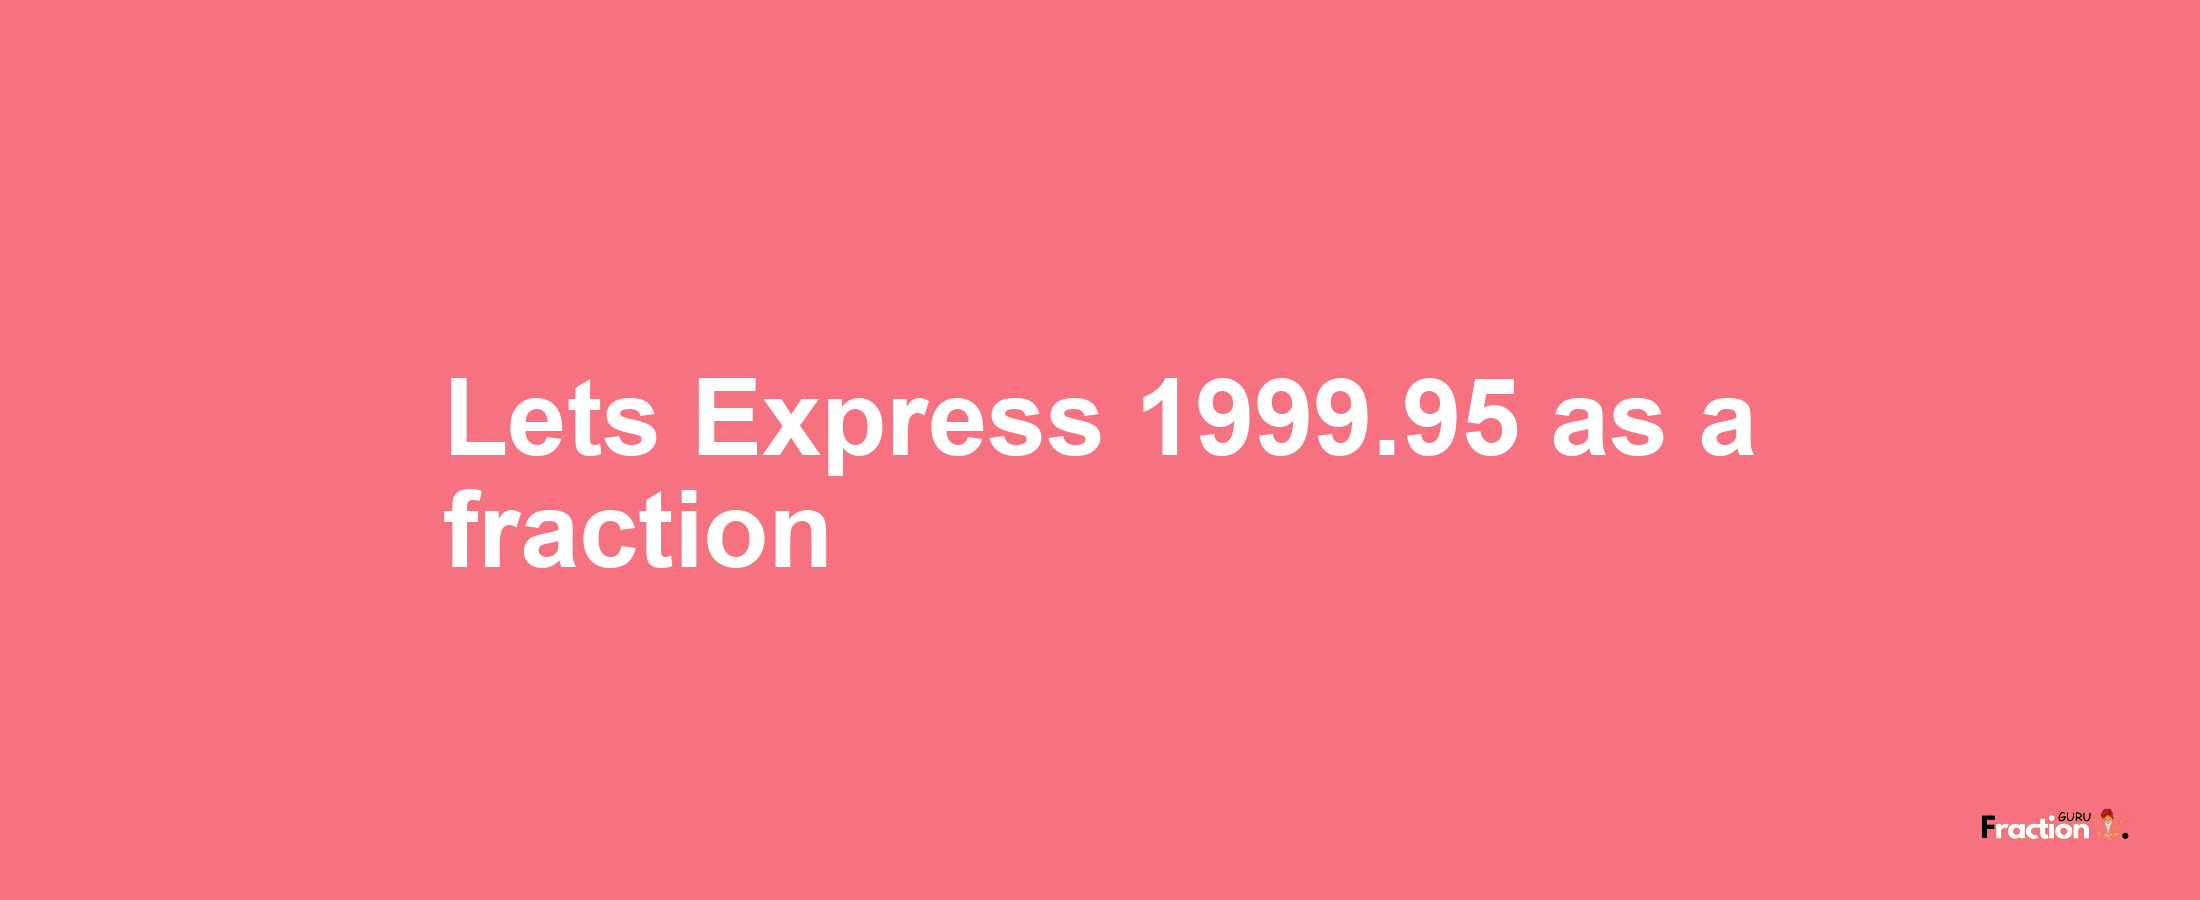 Lets Express 1999.95 as afraction